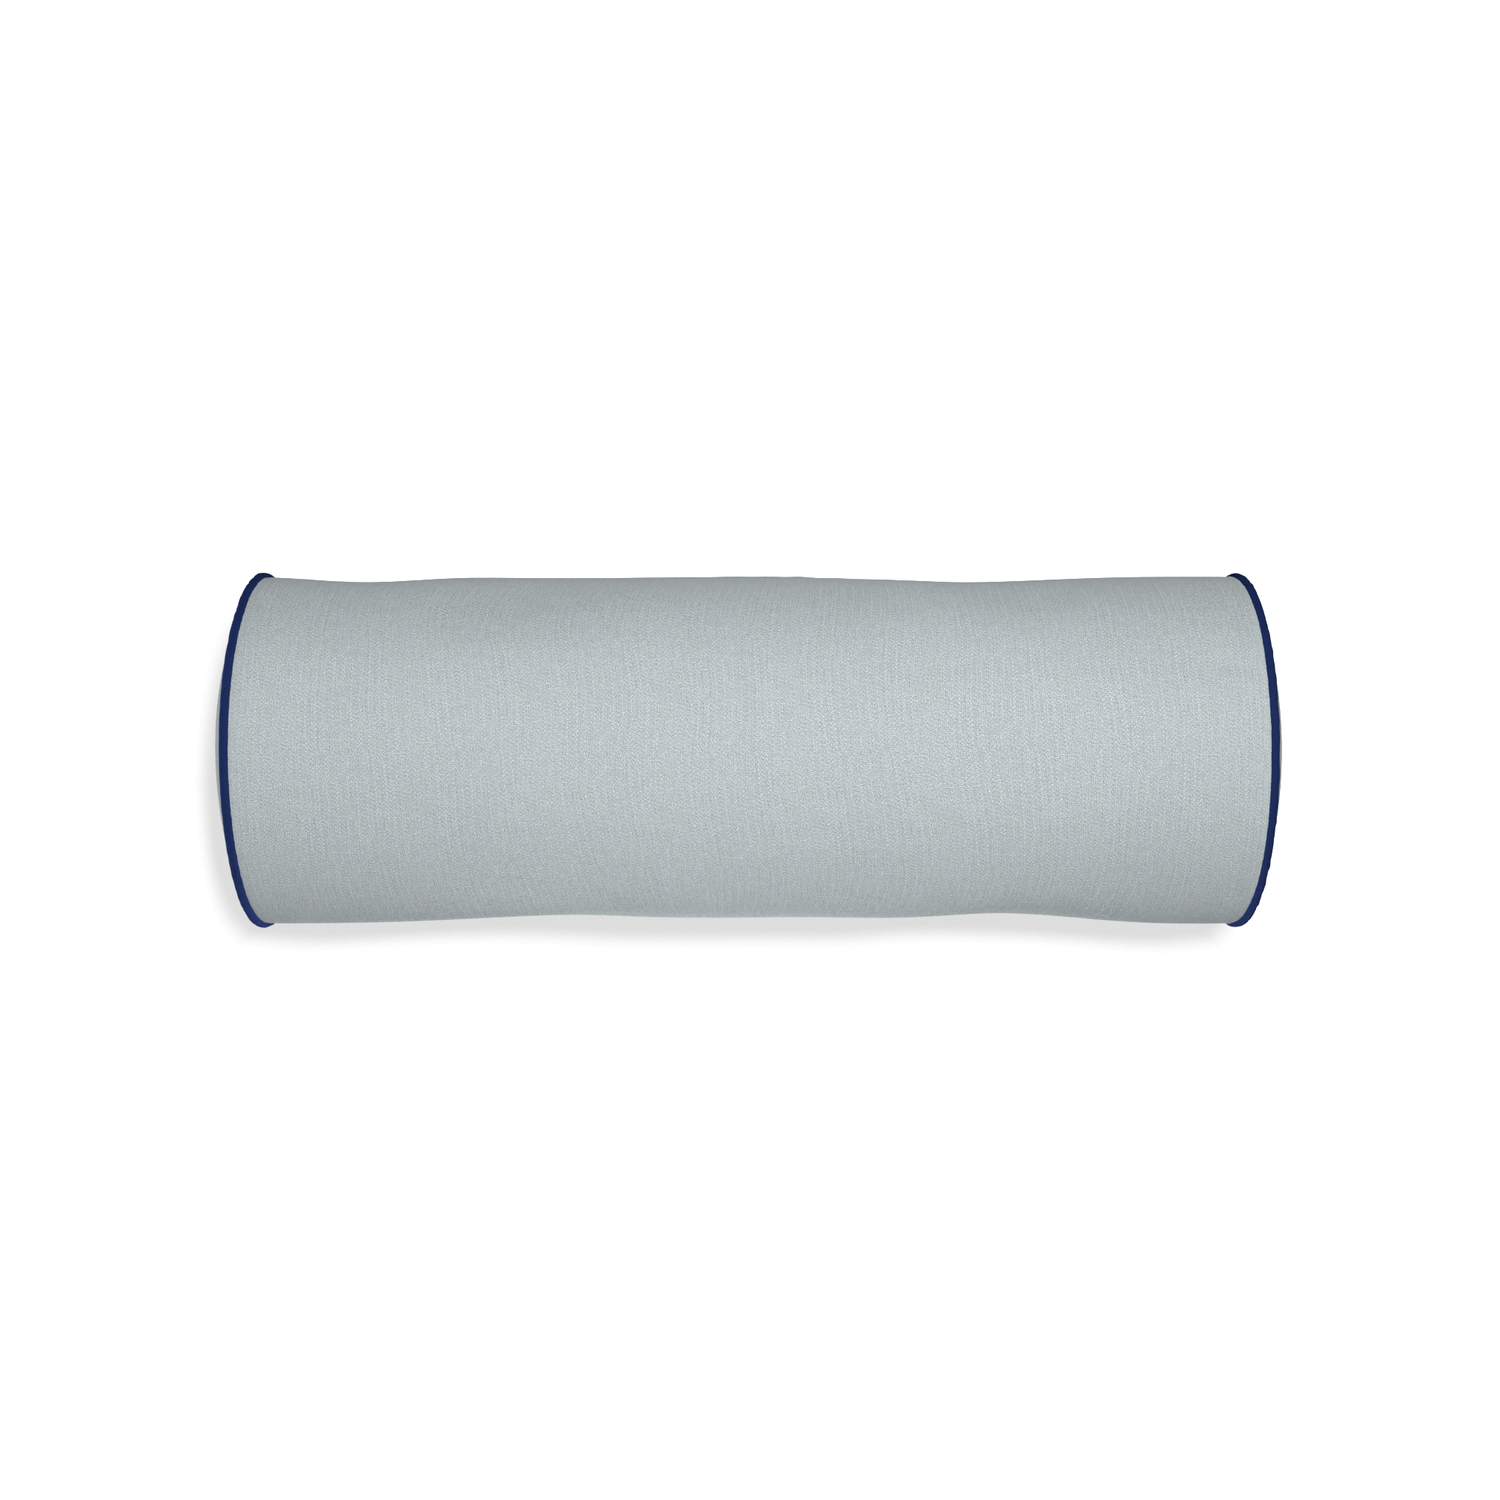 Bolster sea custom grey bluepillow with midnight piping on white background